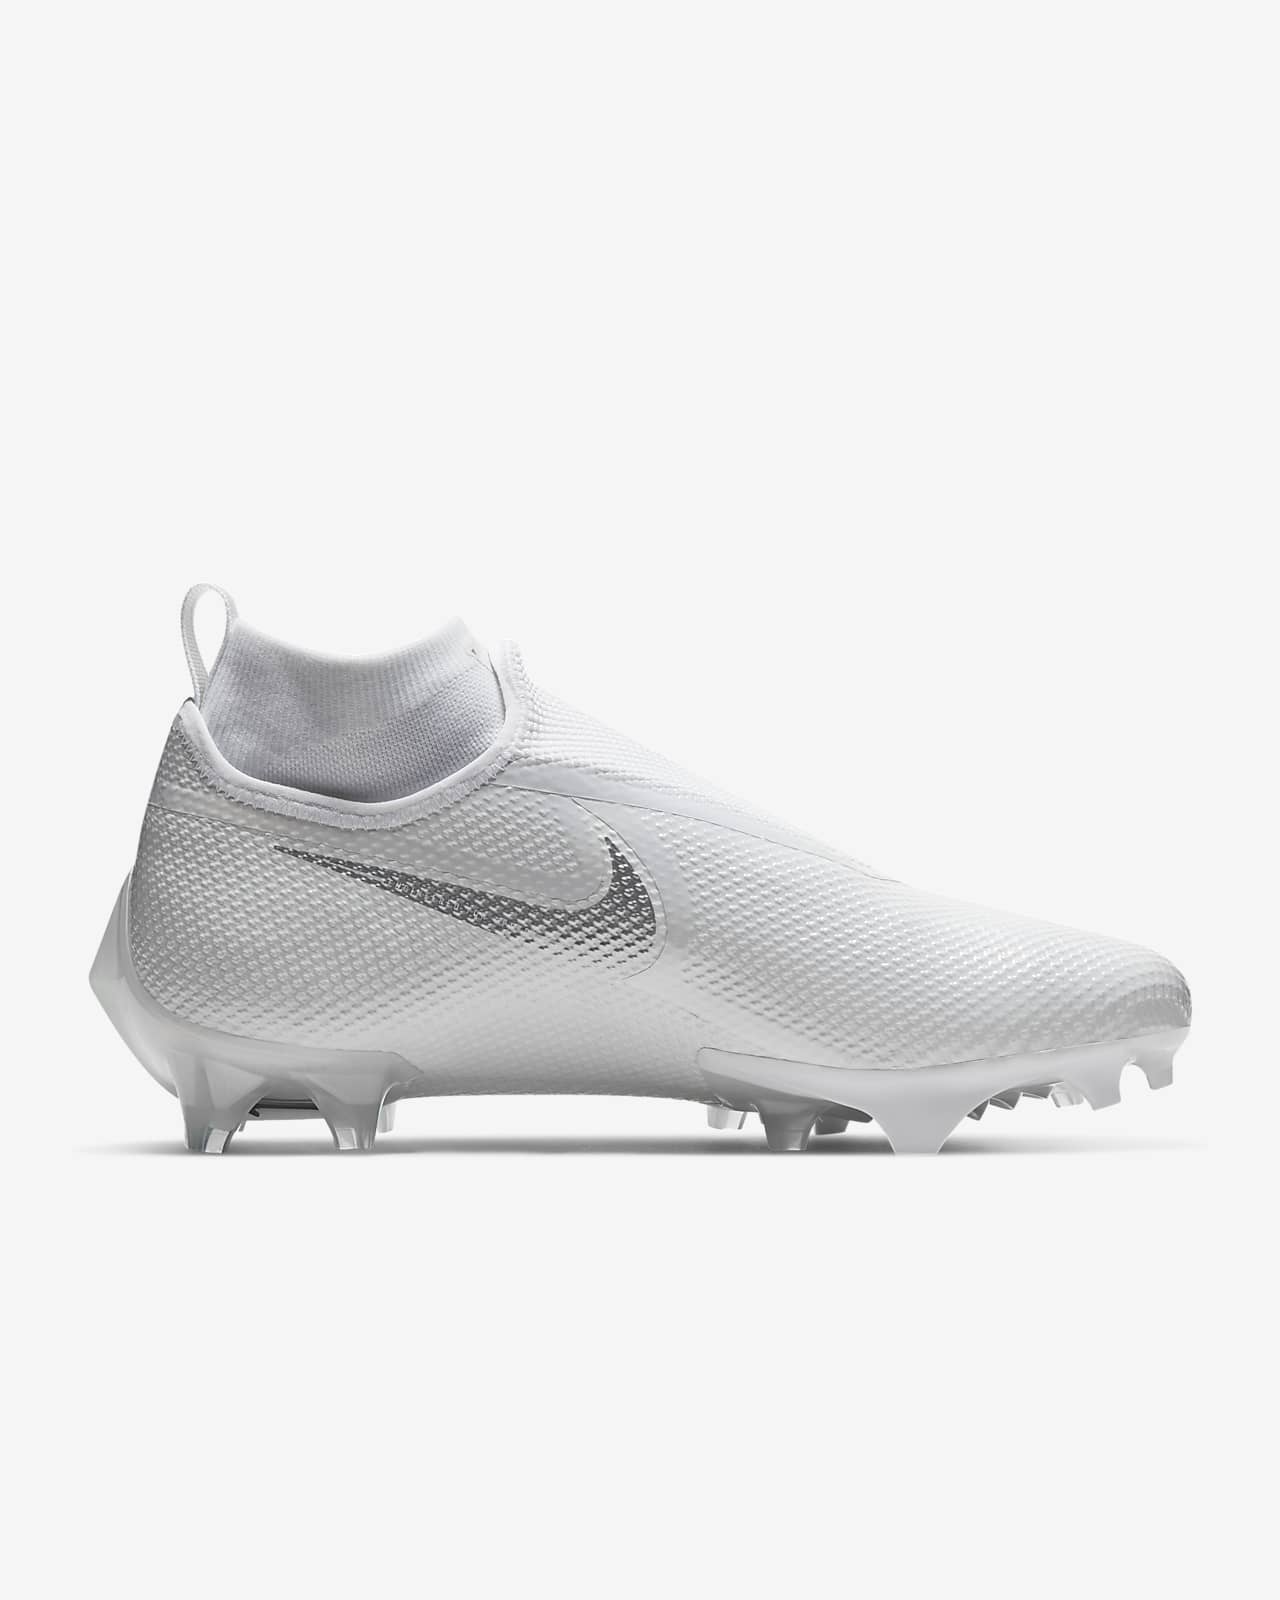 nike cleats black and white